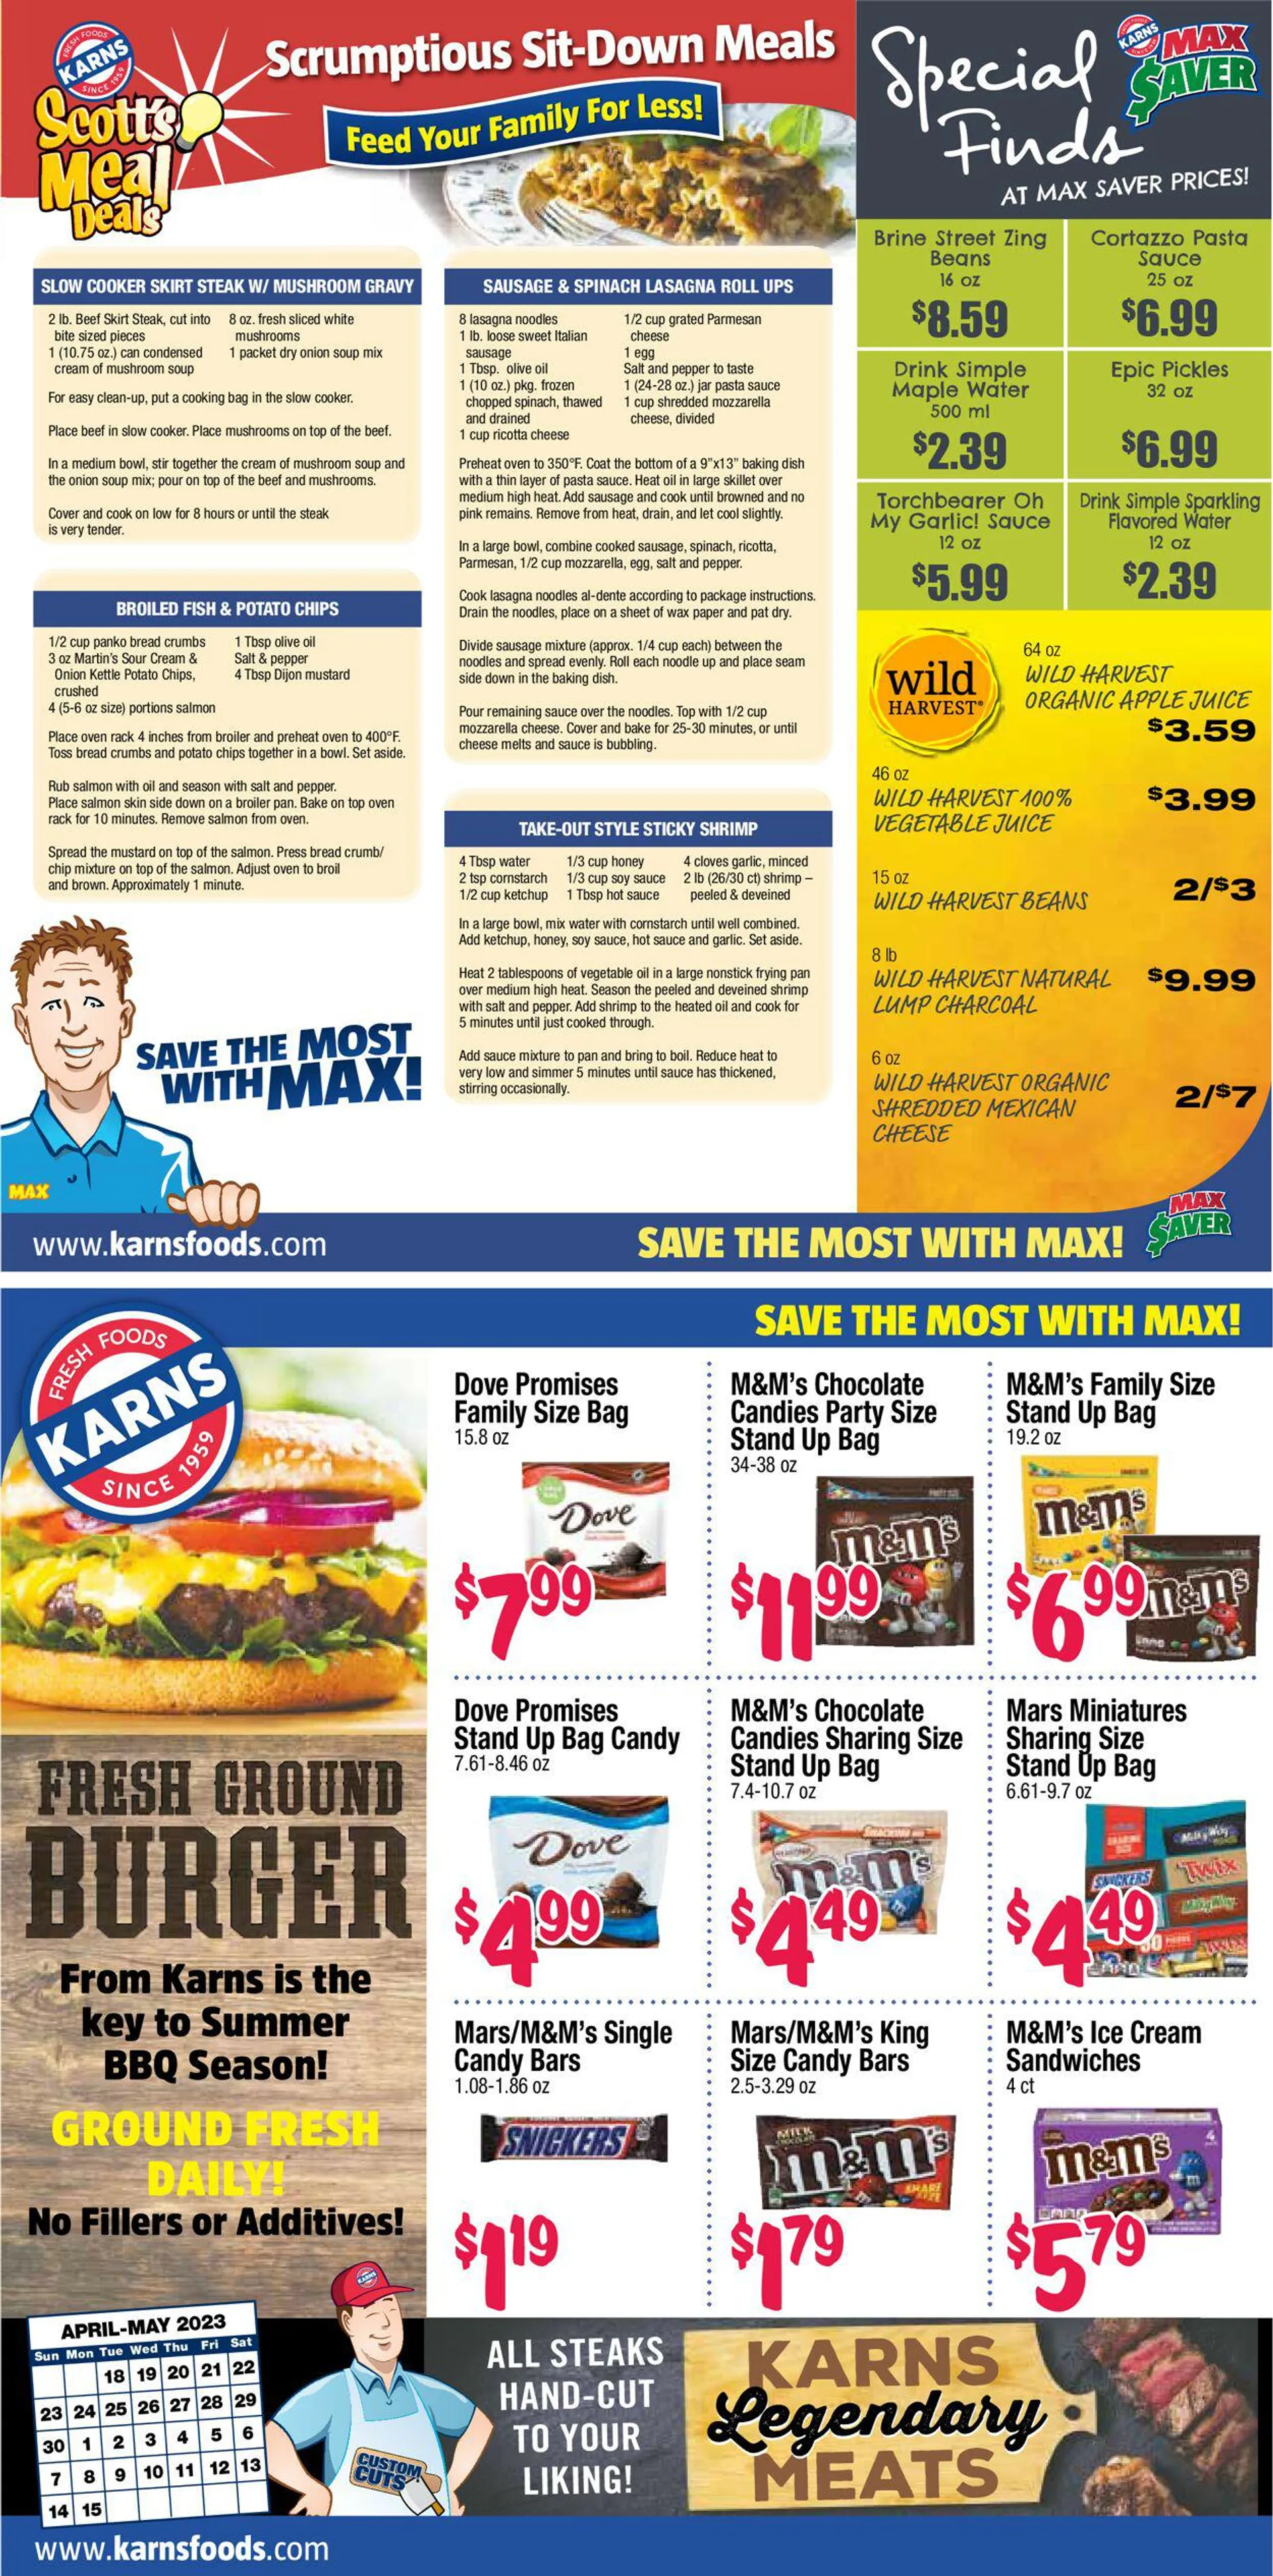 Karns Quality Foods Current weekly ad - 8